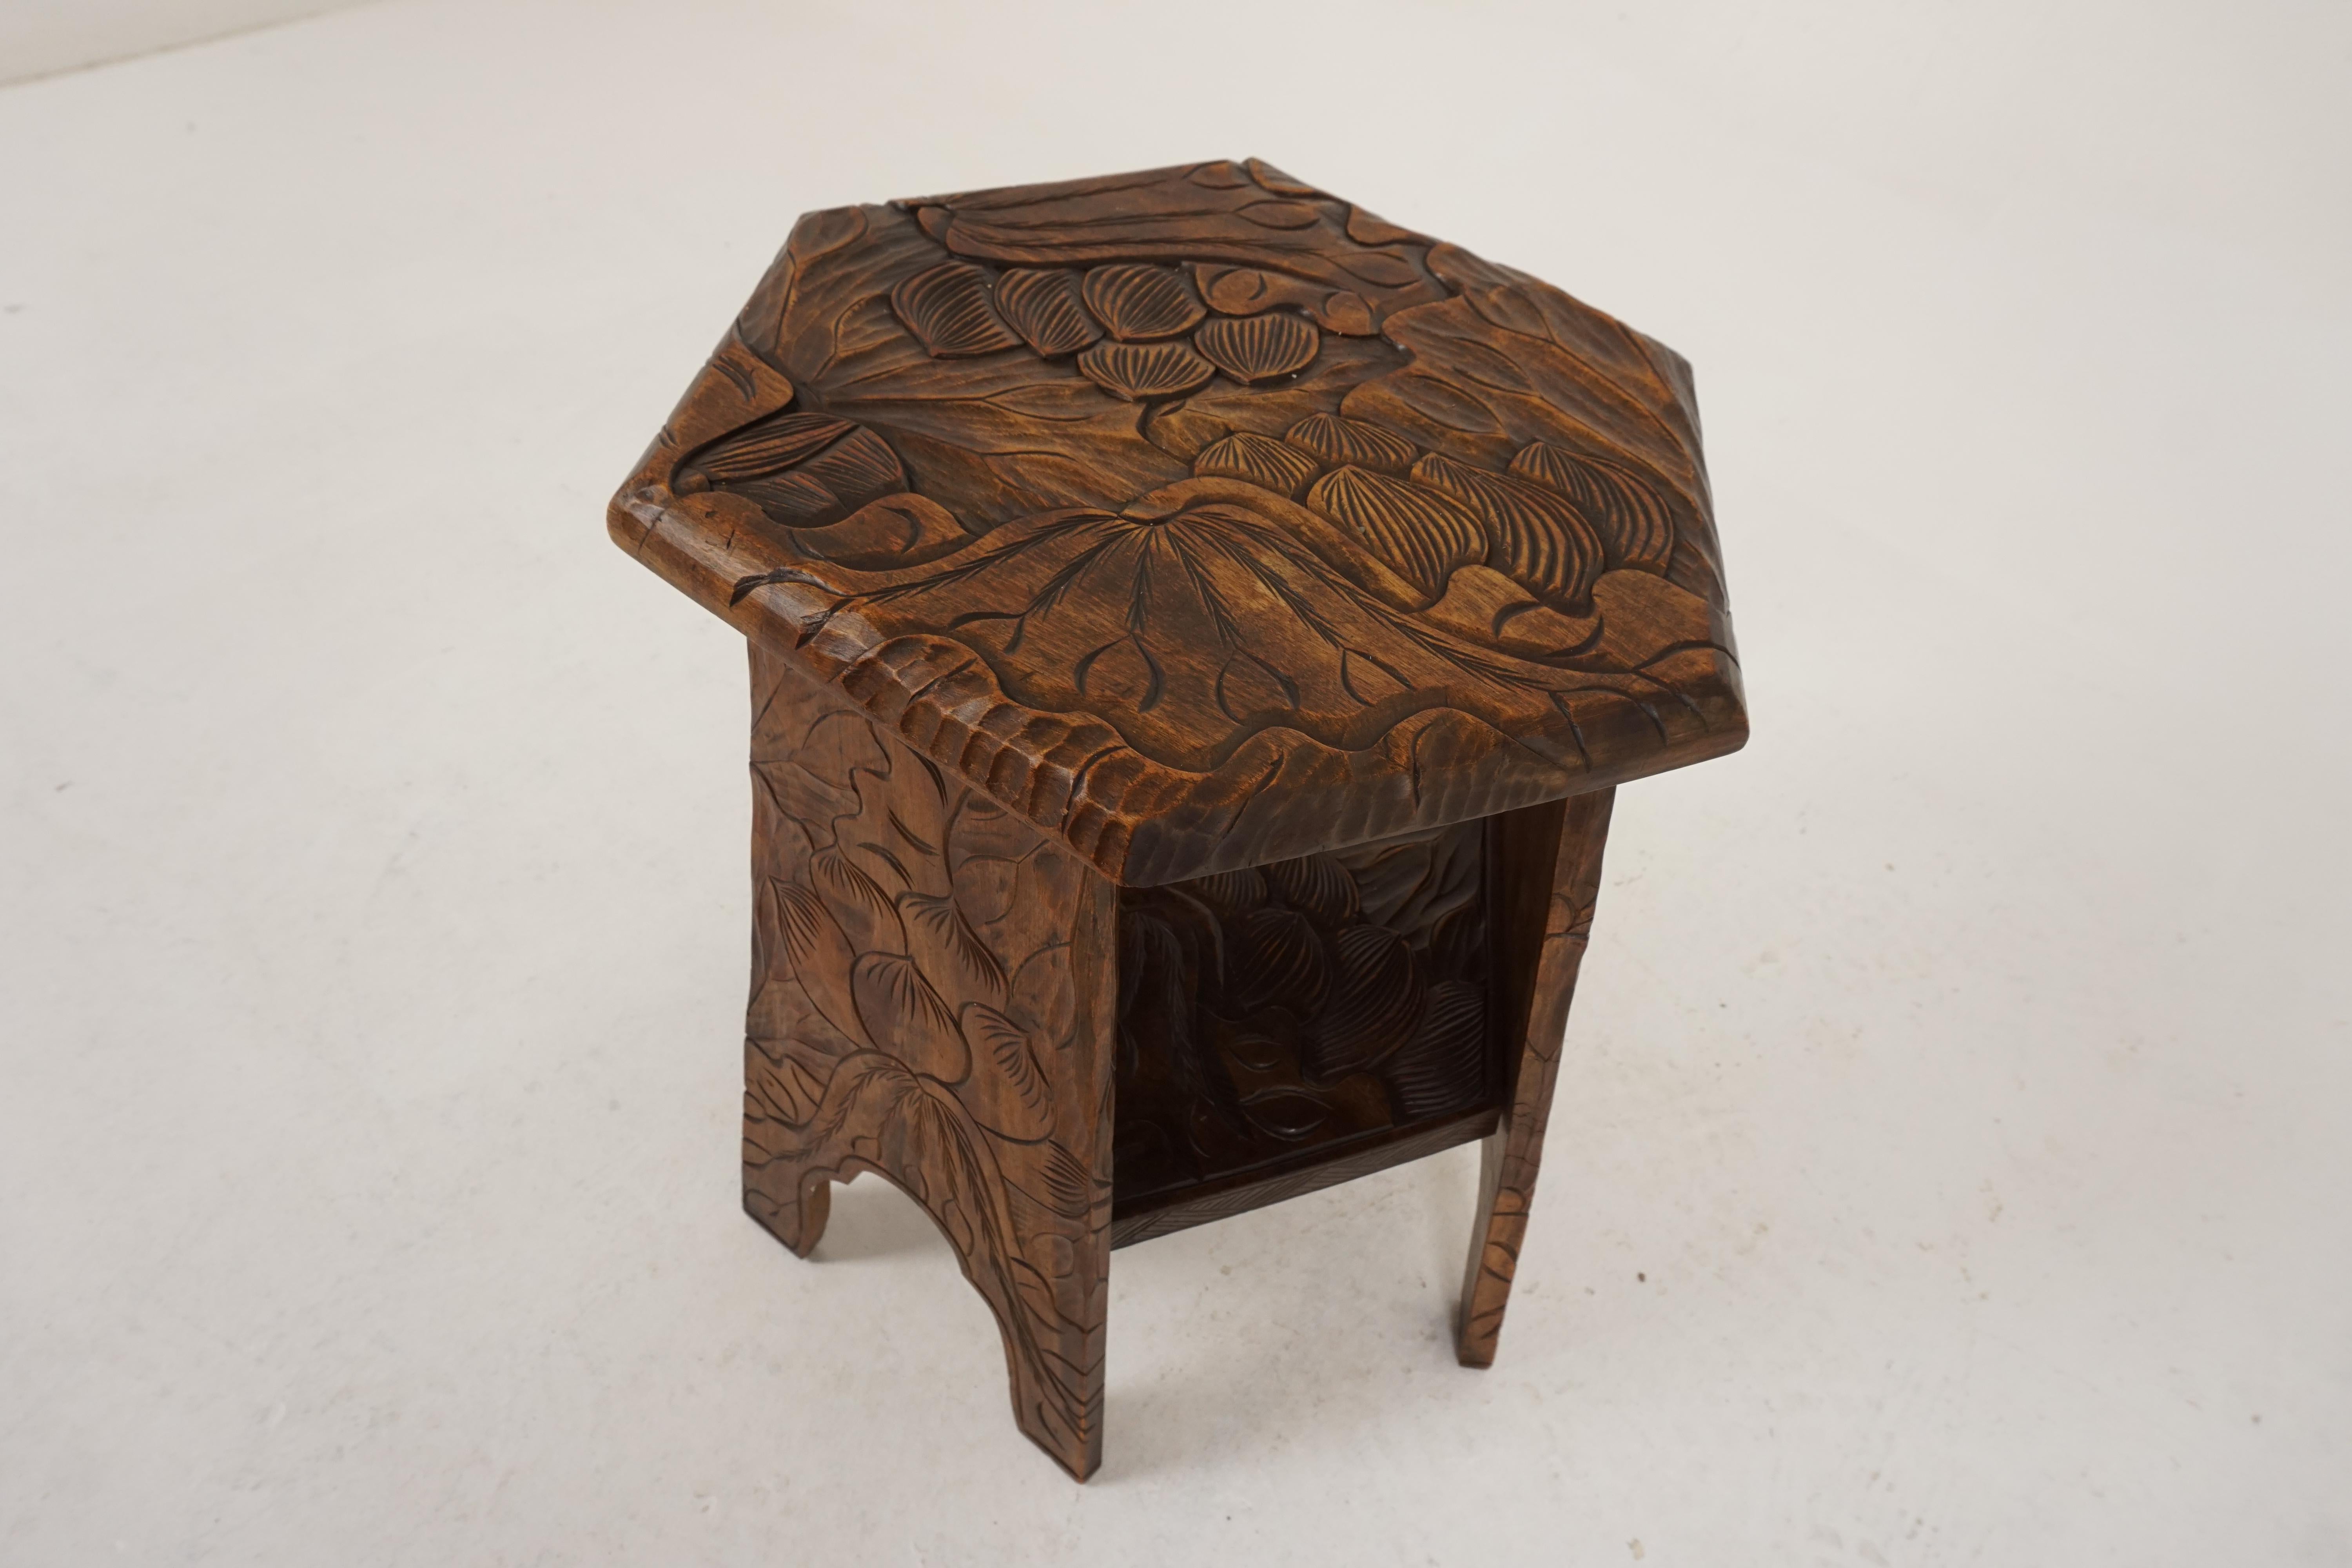 Japanese Antique Carved Plant Stand, Side Table, Liberty's London, Japan, 1905